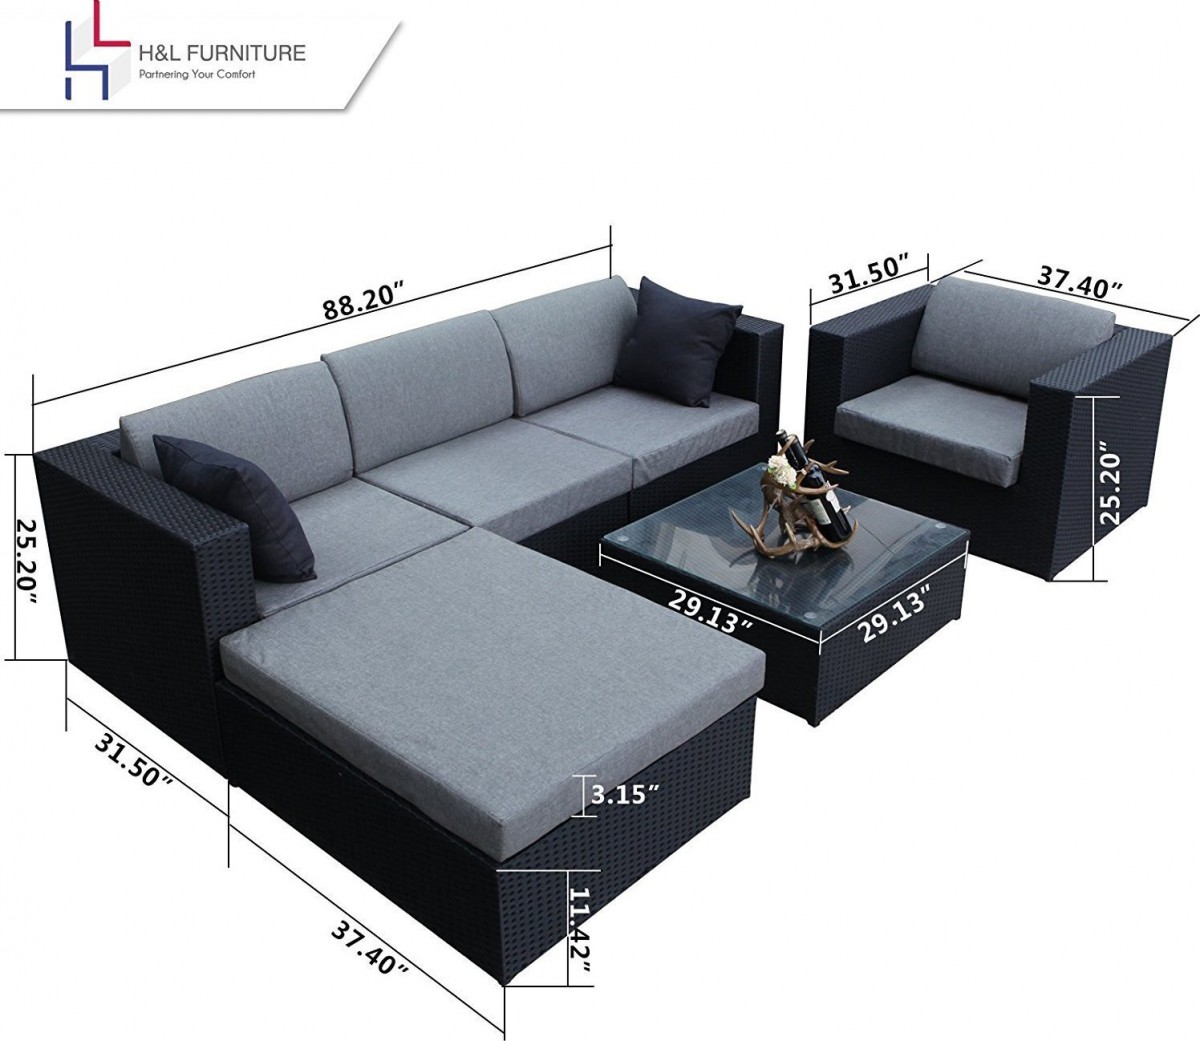 H&L Patio Black 6 Piece Wicker Sectional Sofa Set with Ottoman and Coffee Table